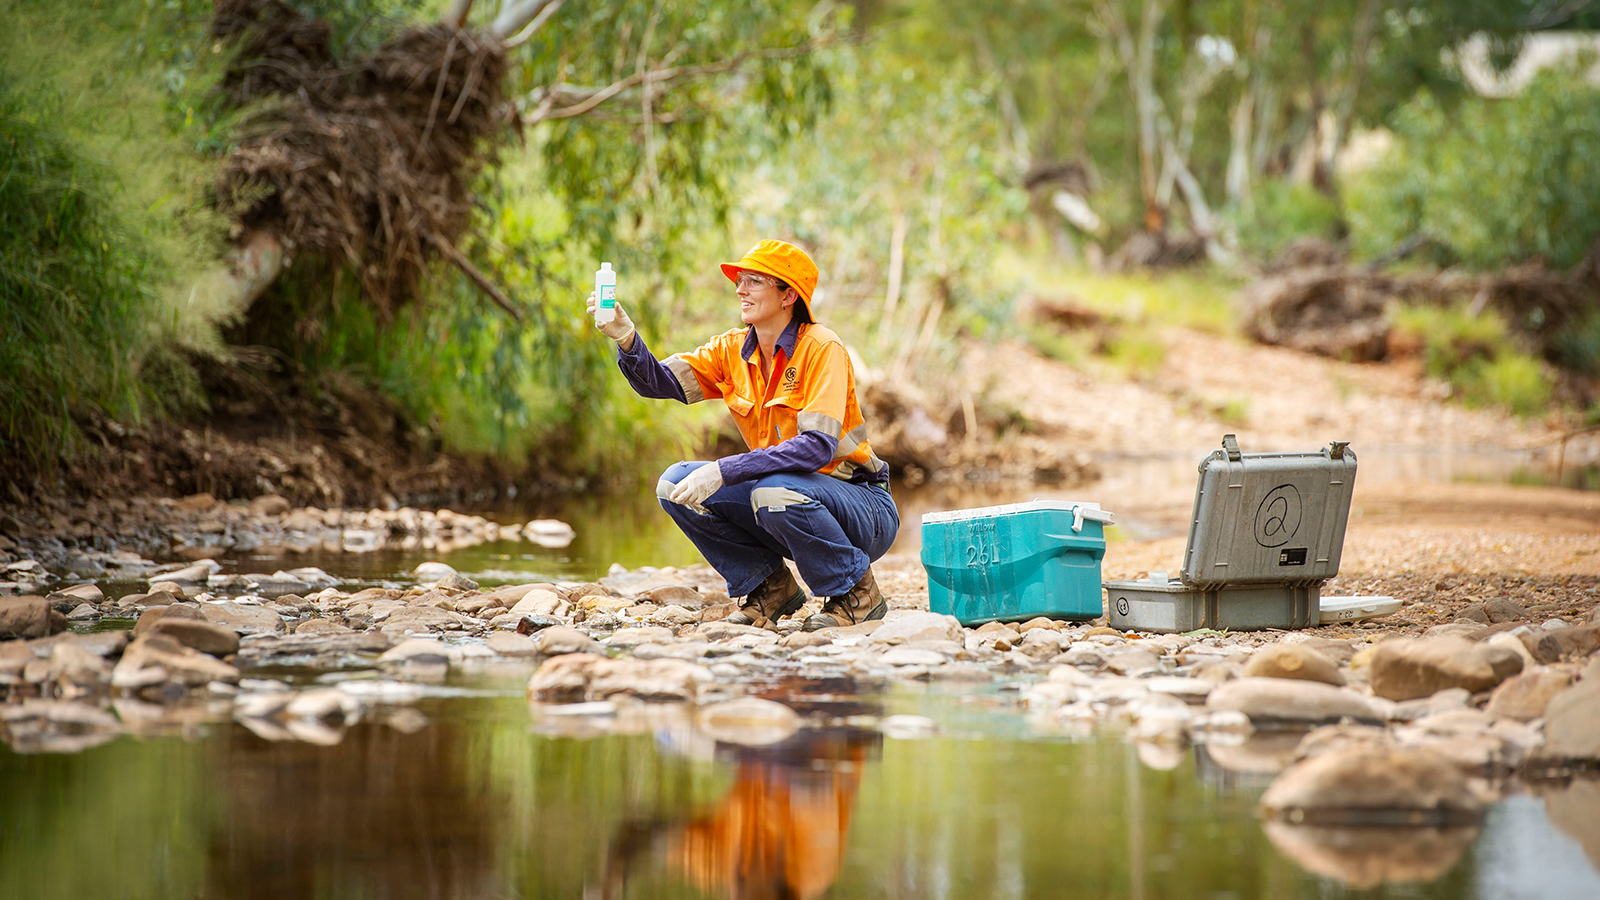 Protecting groundwater where we operate